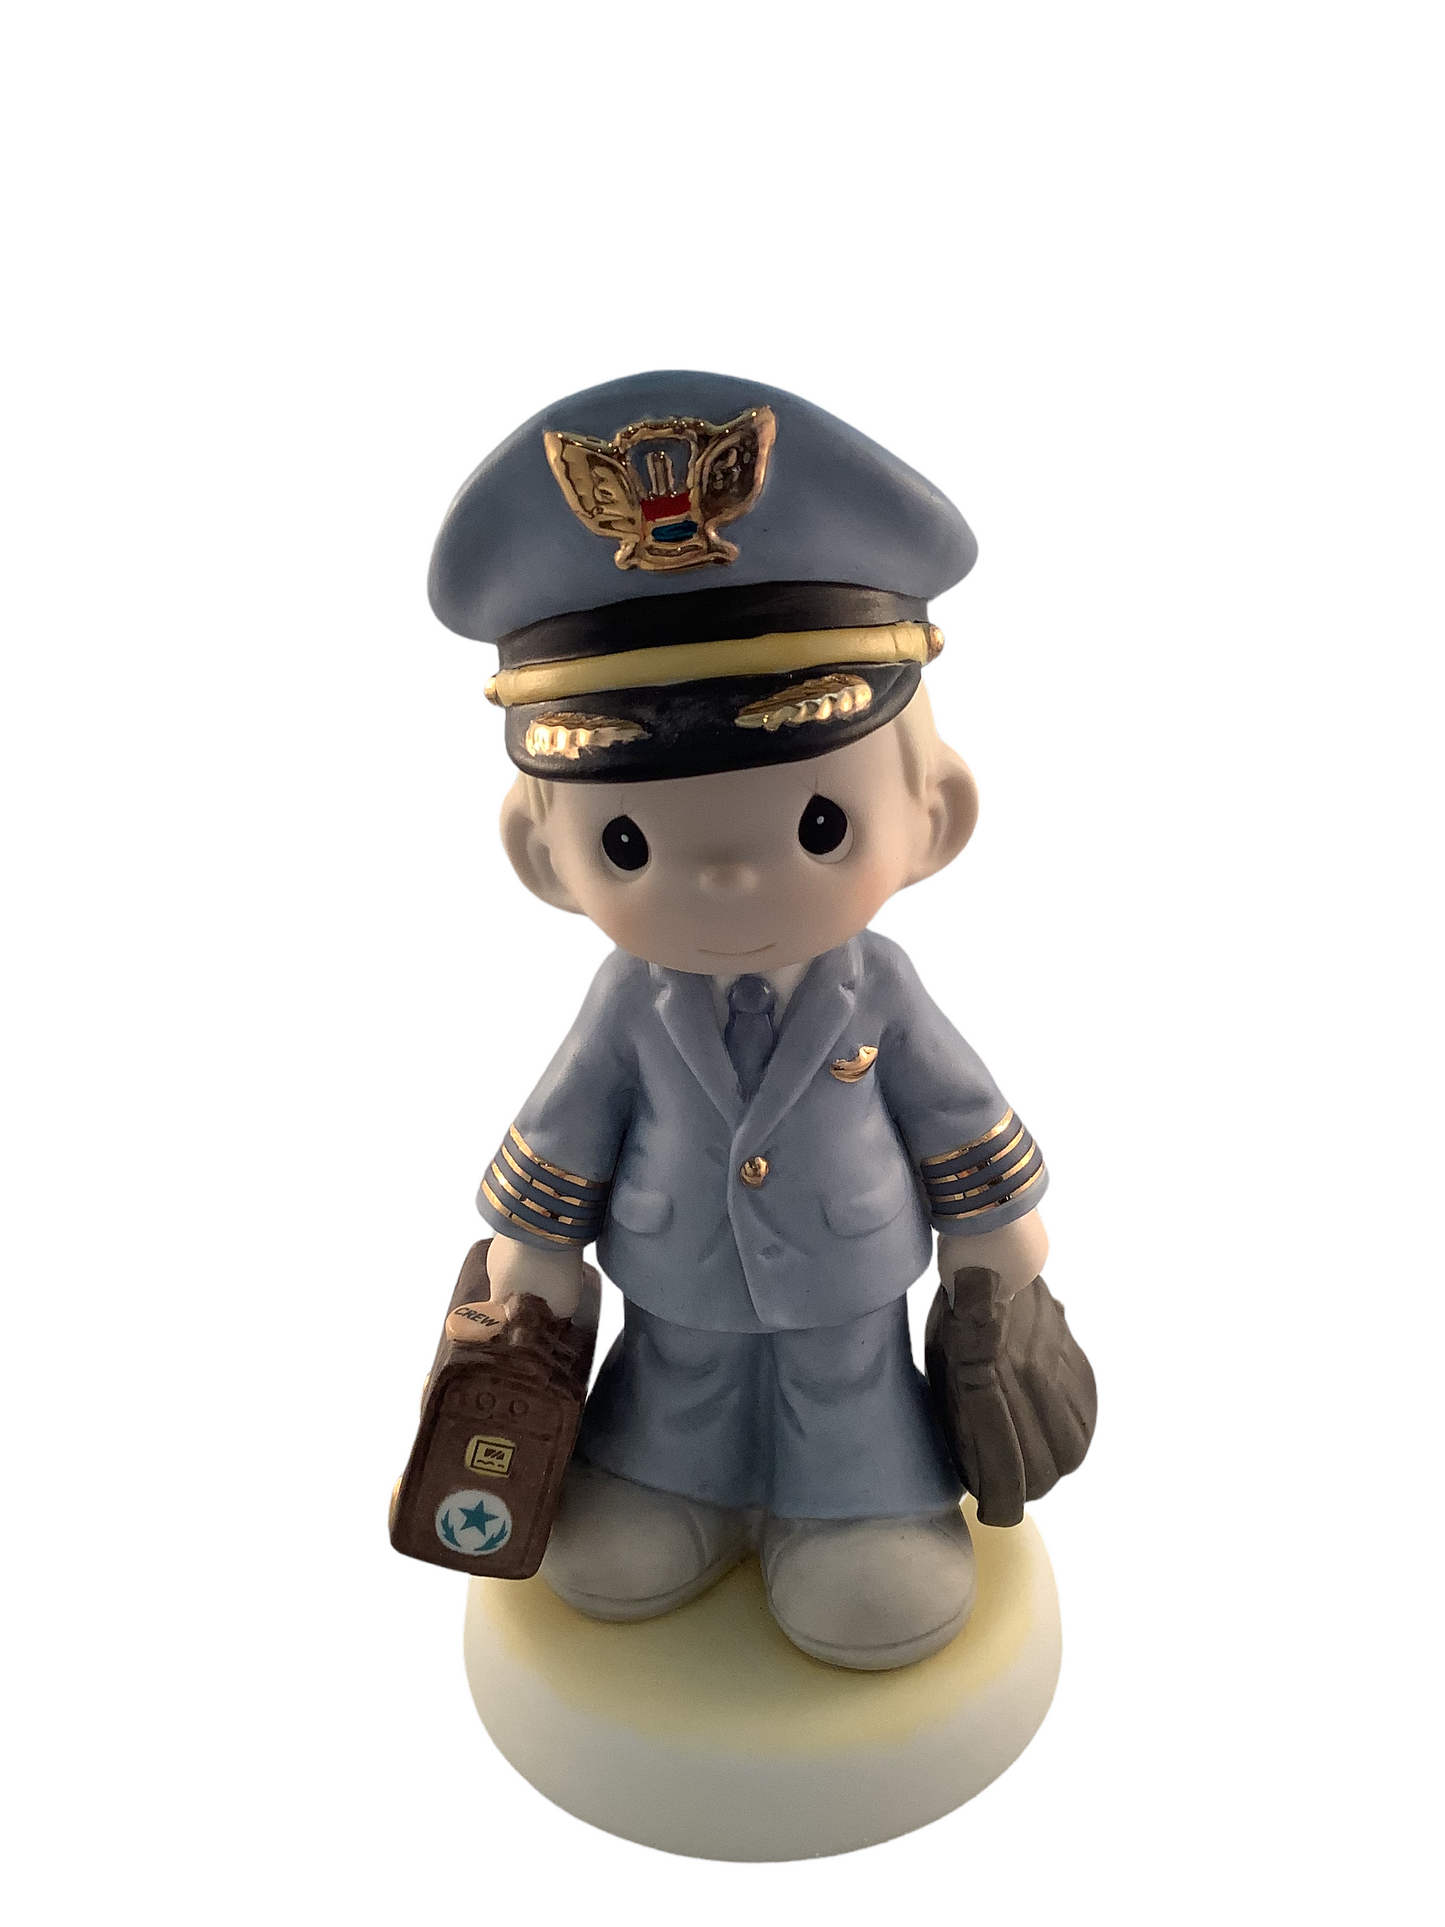 Our Heroes In The Sky (Boy) - Precious Moment Figurine